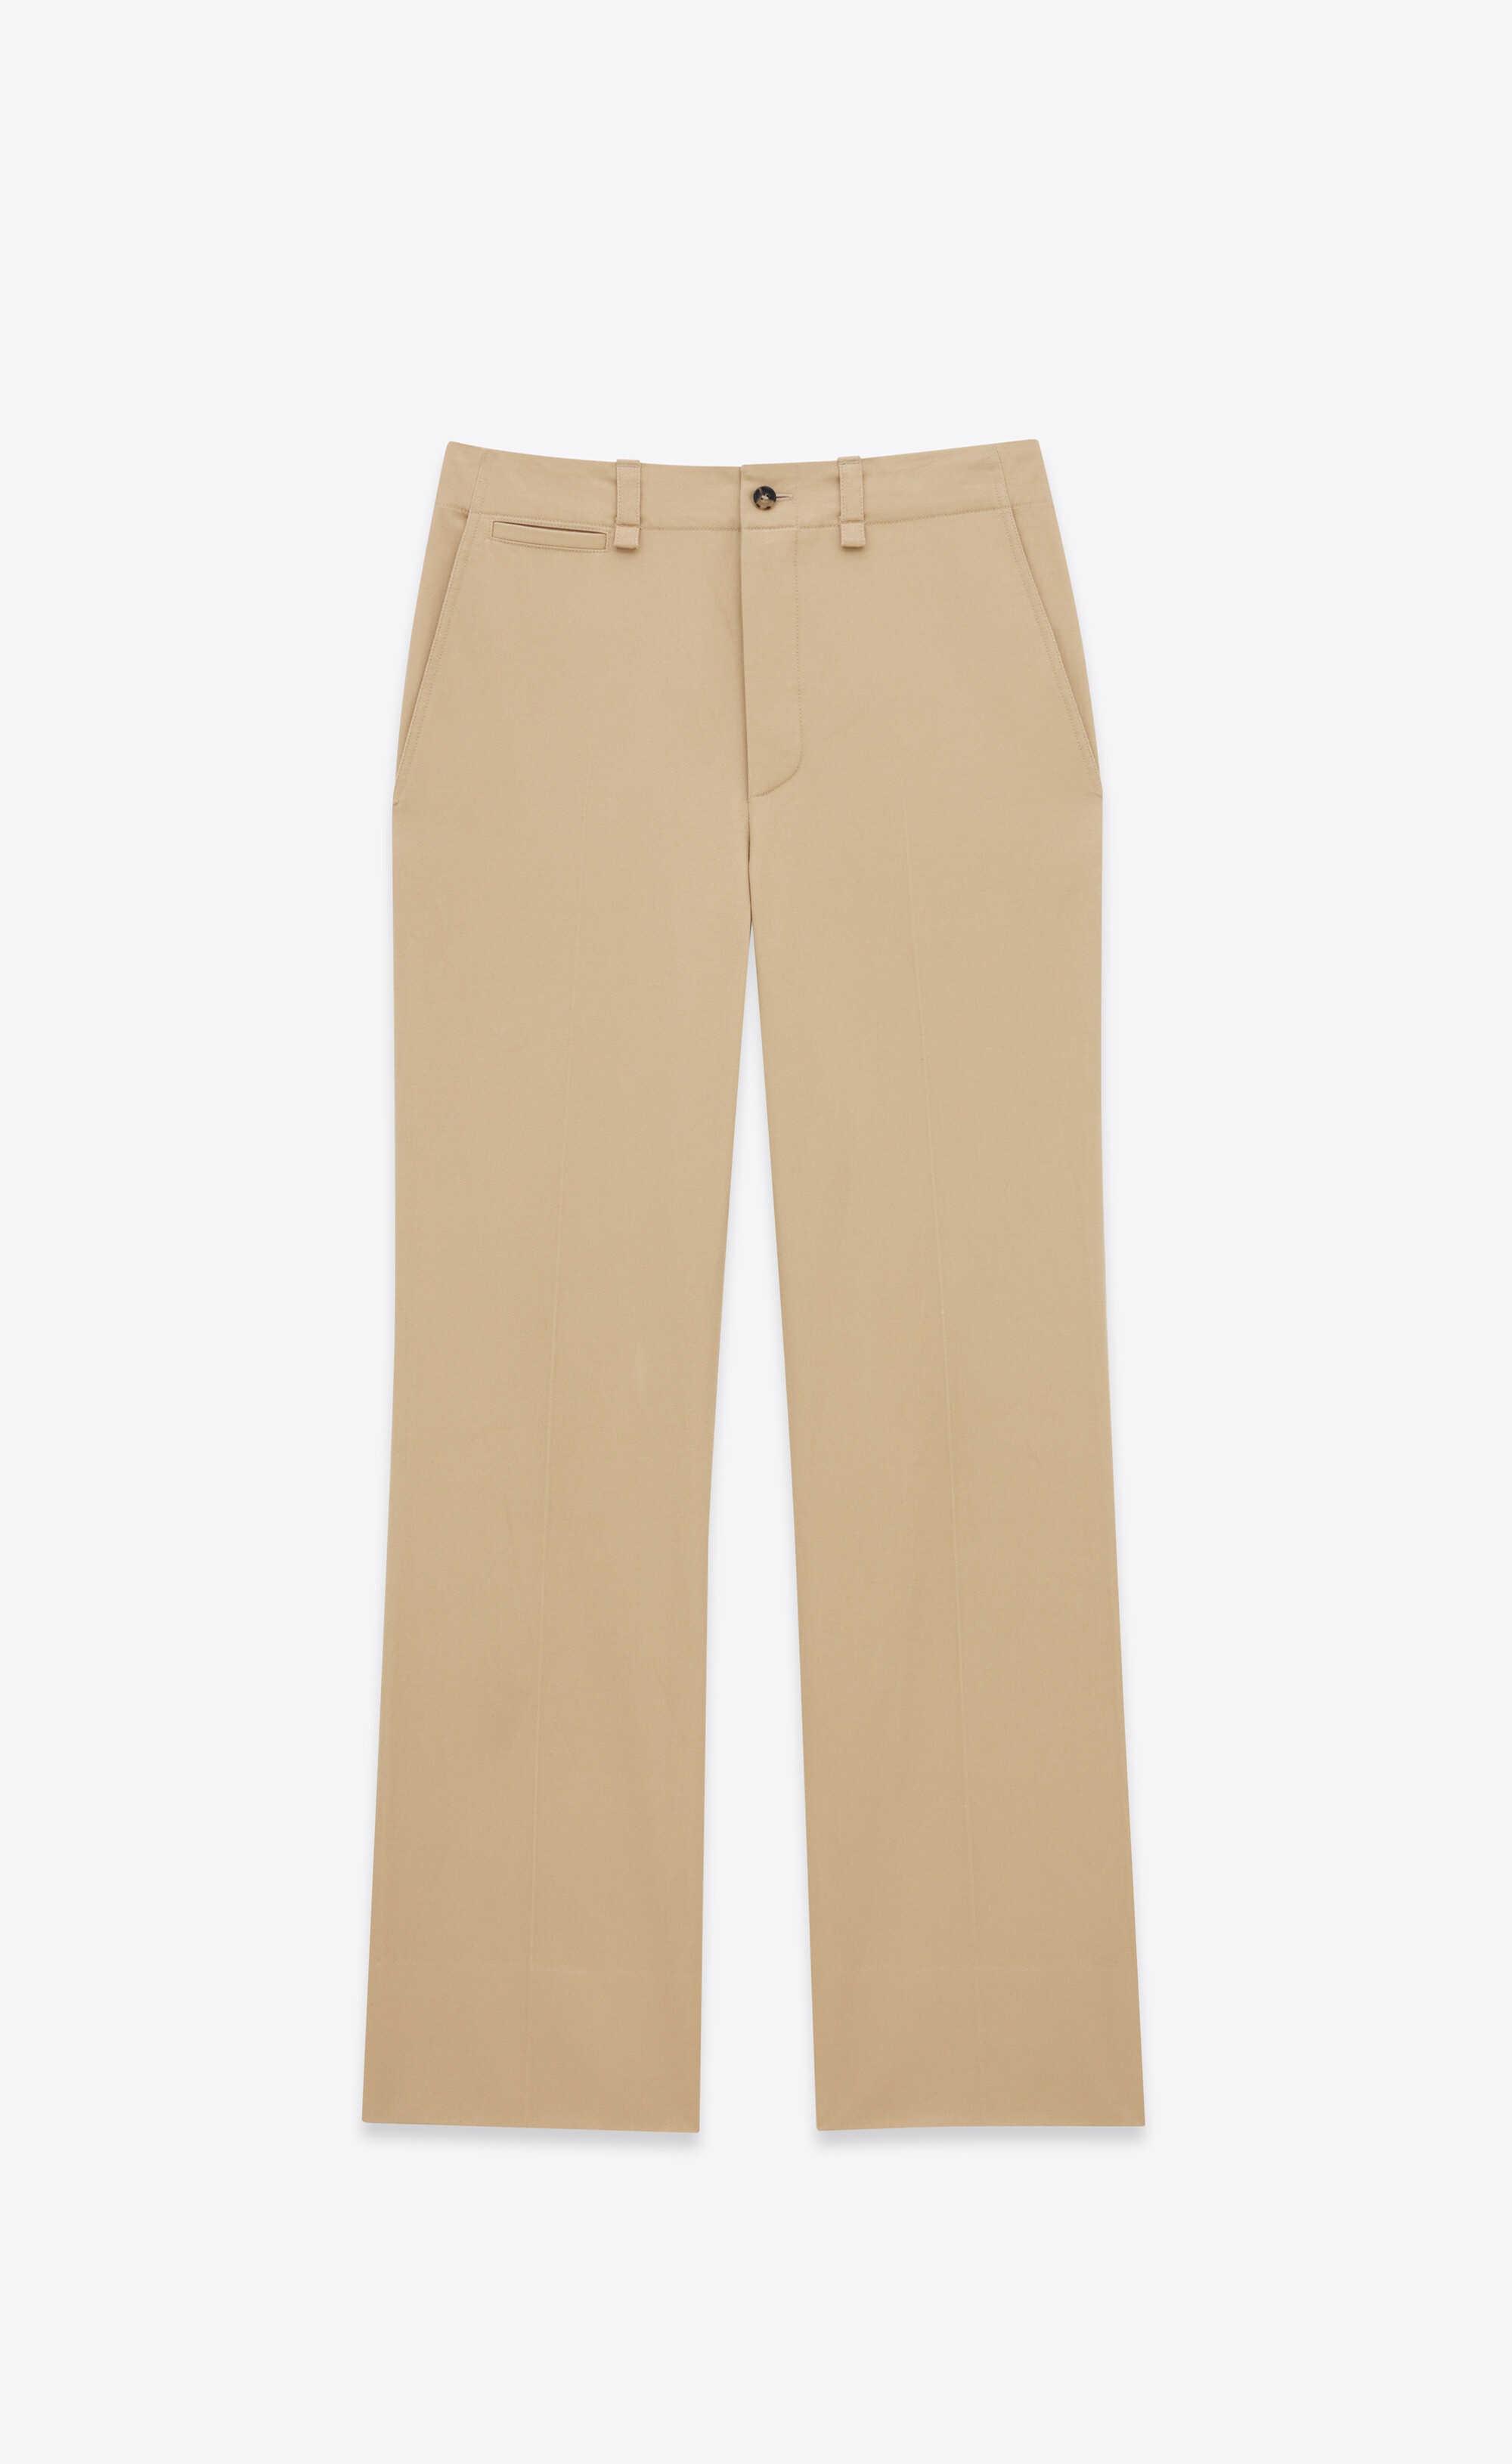 pants in cotton drill - 1